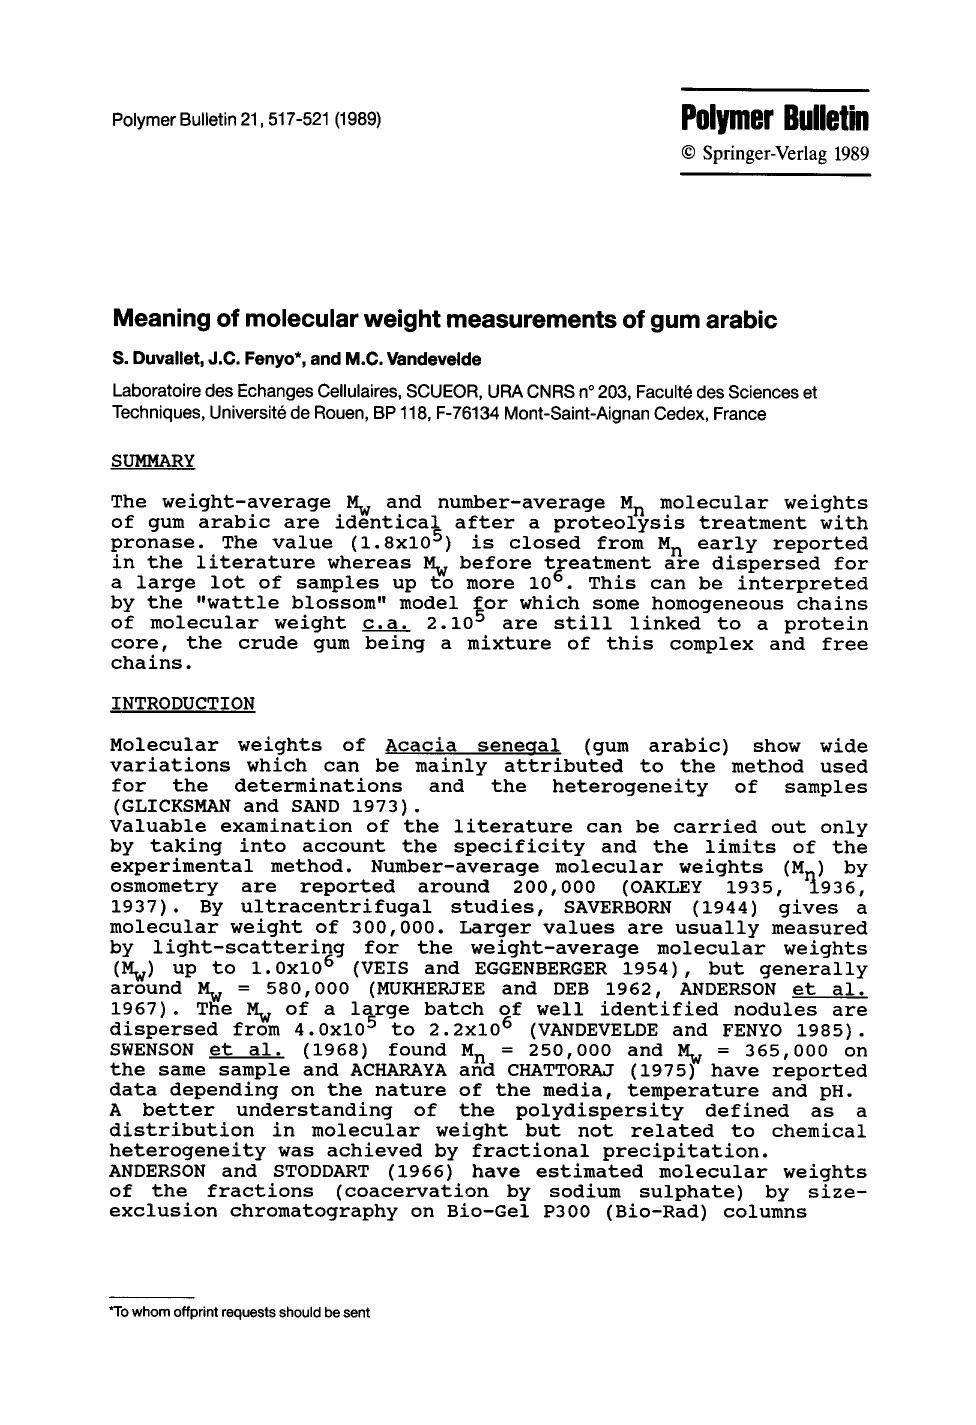 Meaning of molecular weight measurements of gum arabic by Unknown